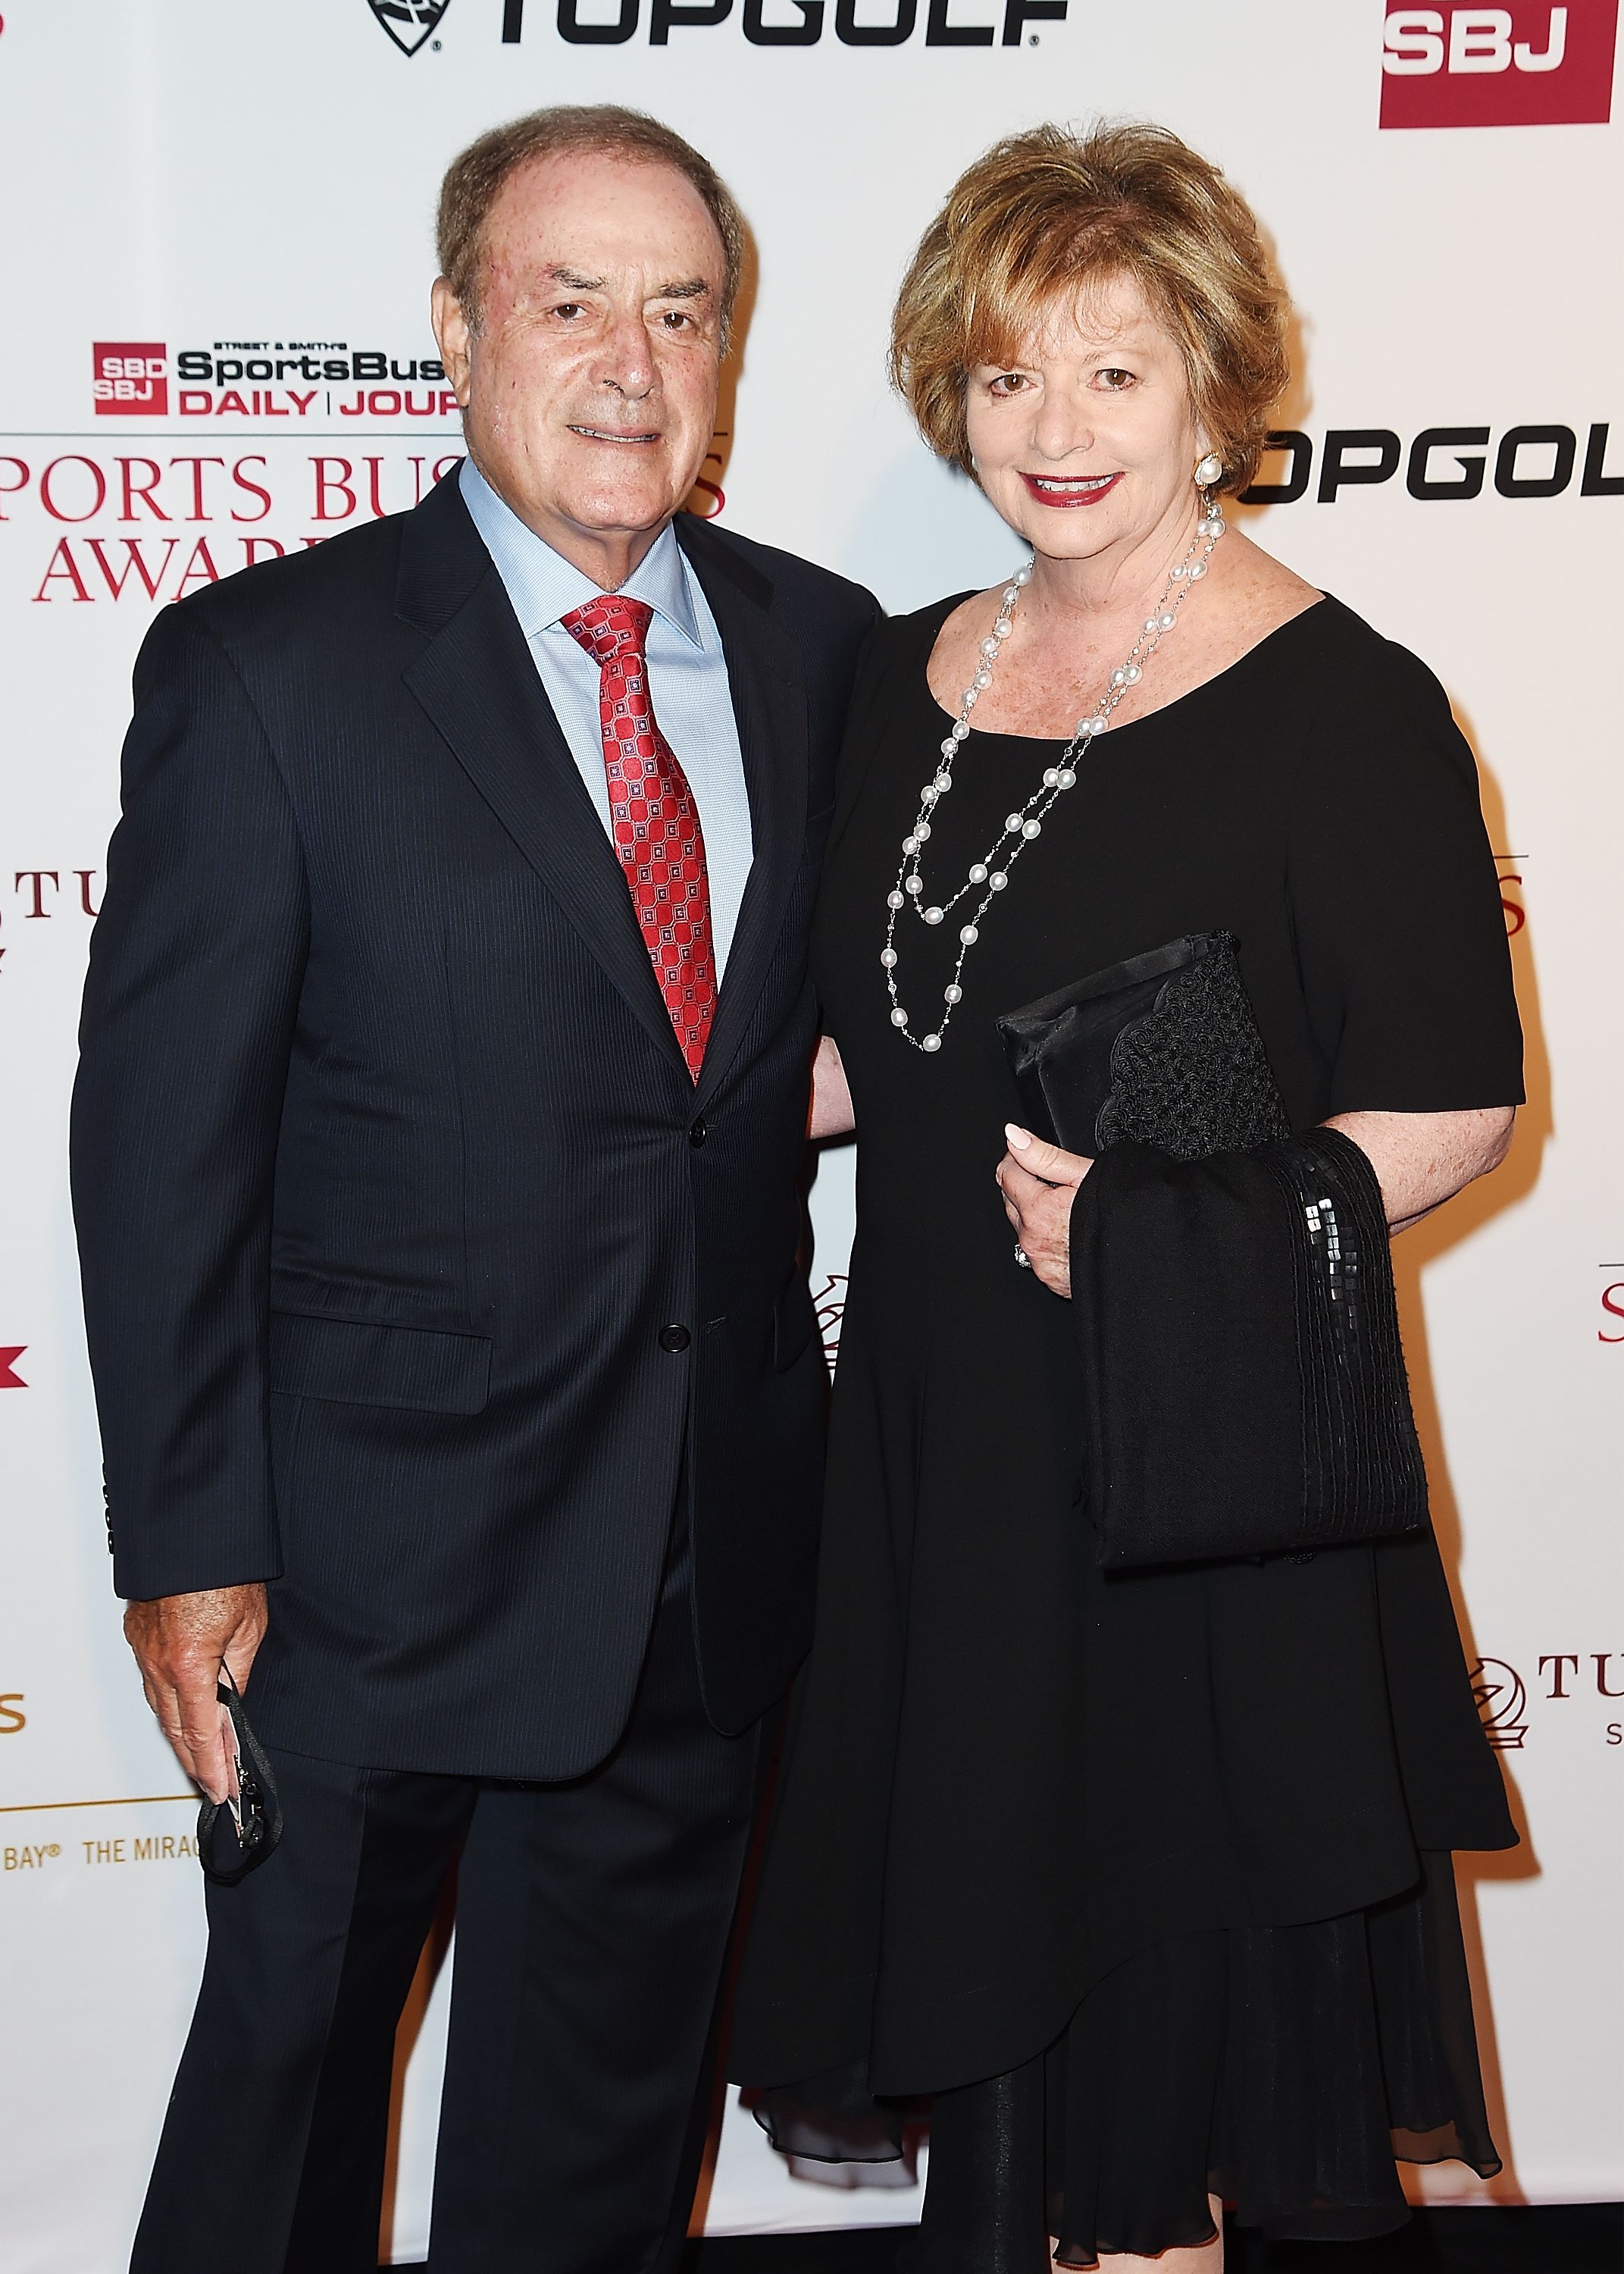 Al Michaels and Linda Anne Stamaton during the 10th Annual Sports Business Awards at The New York Marriott Marquis on May 24, 2017, in New York City. | Source: Getty Images